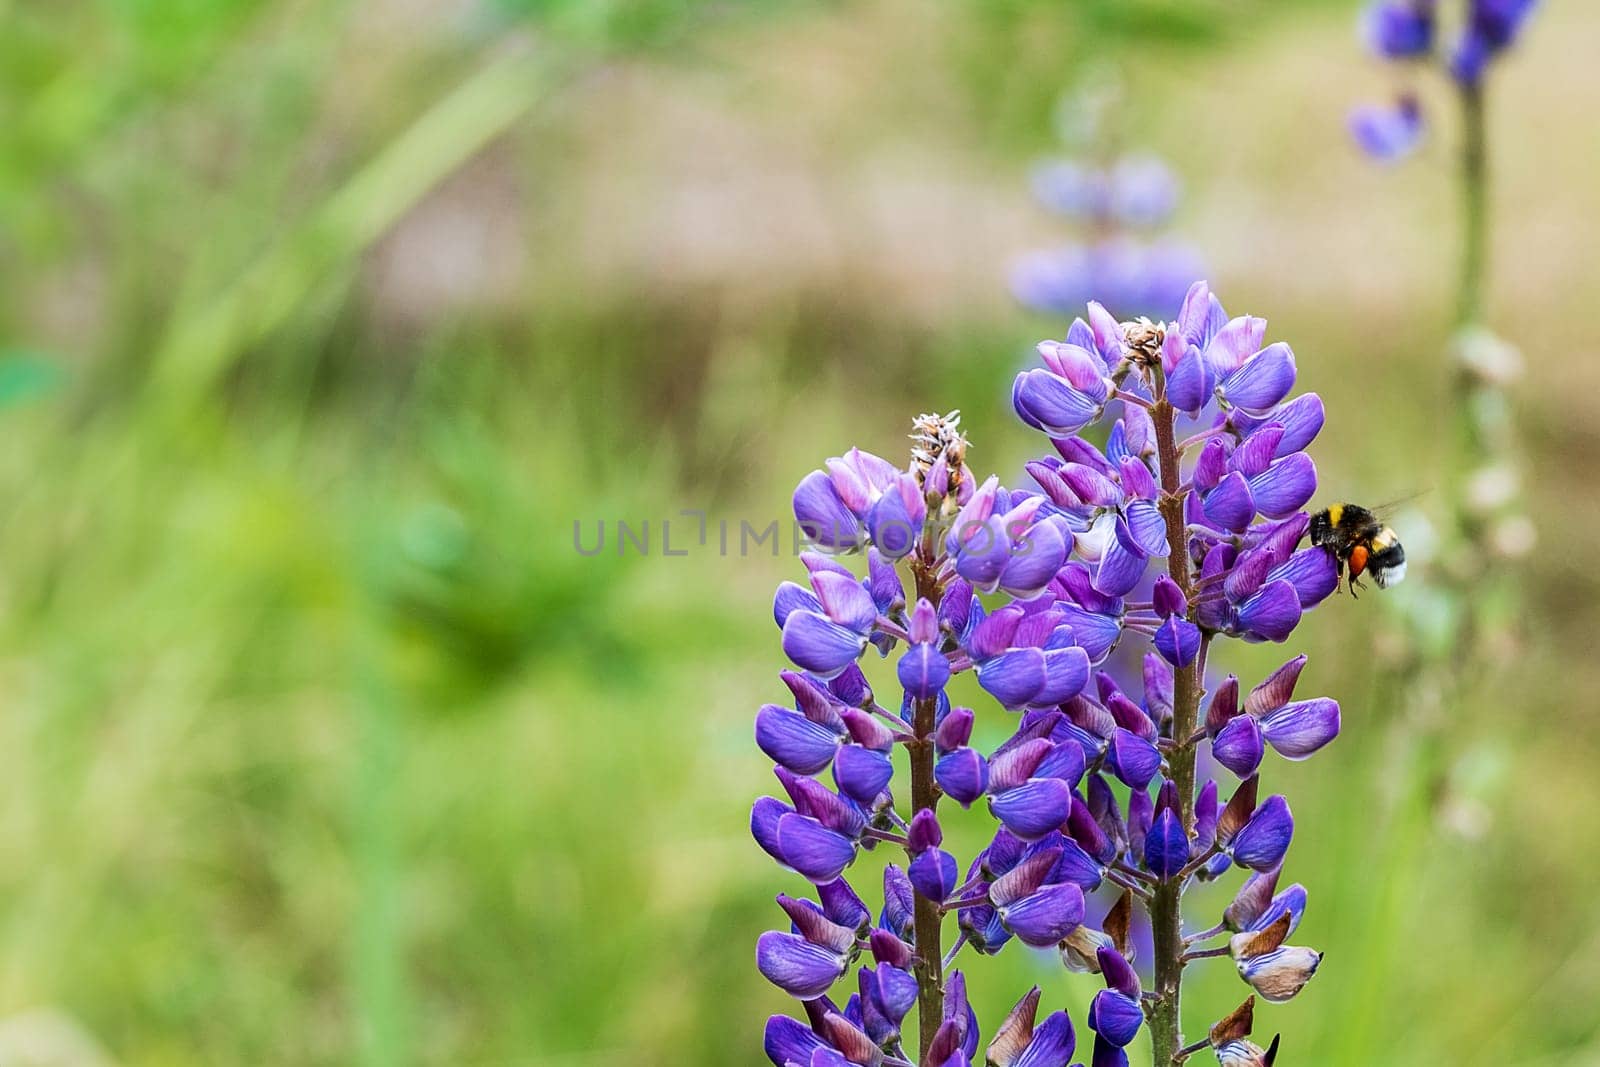 Blooming lupine and flying bumblebee. Nature, summer flowers. Selective focus. Copy space.